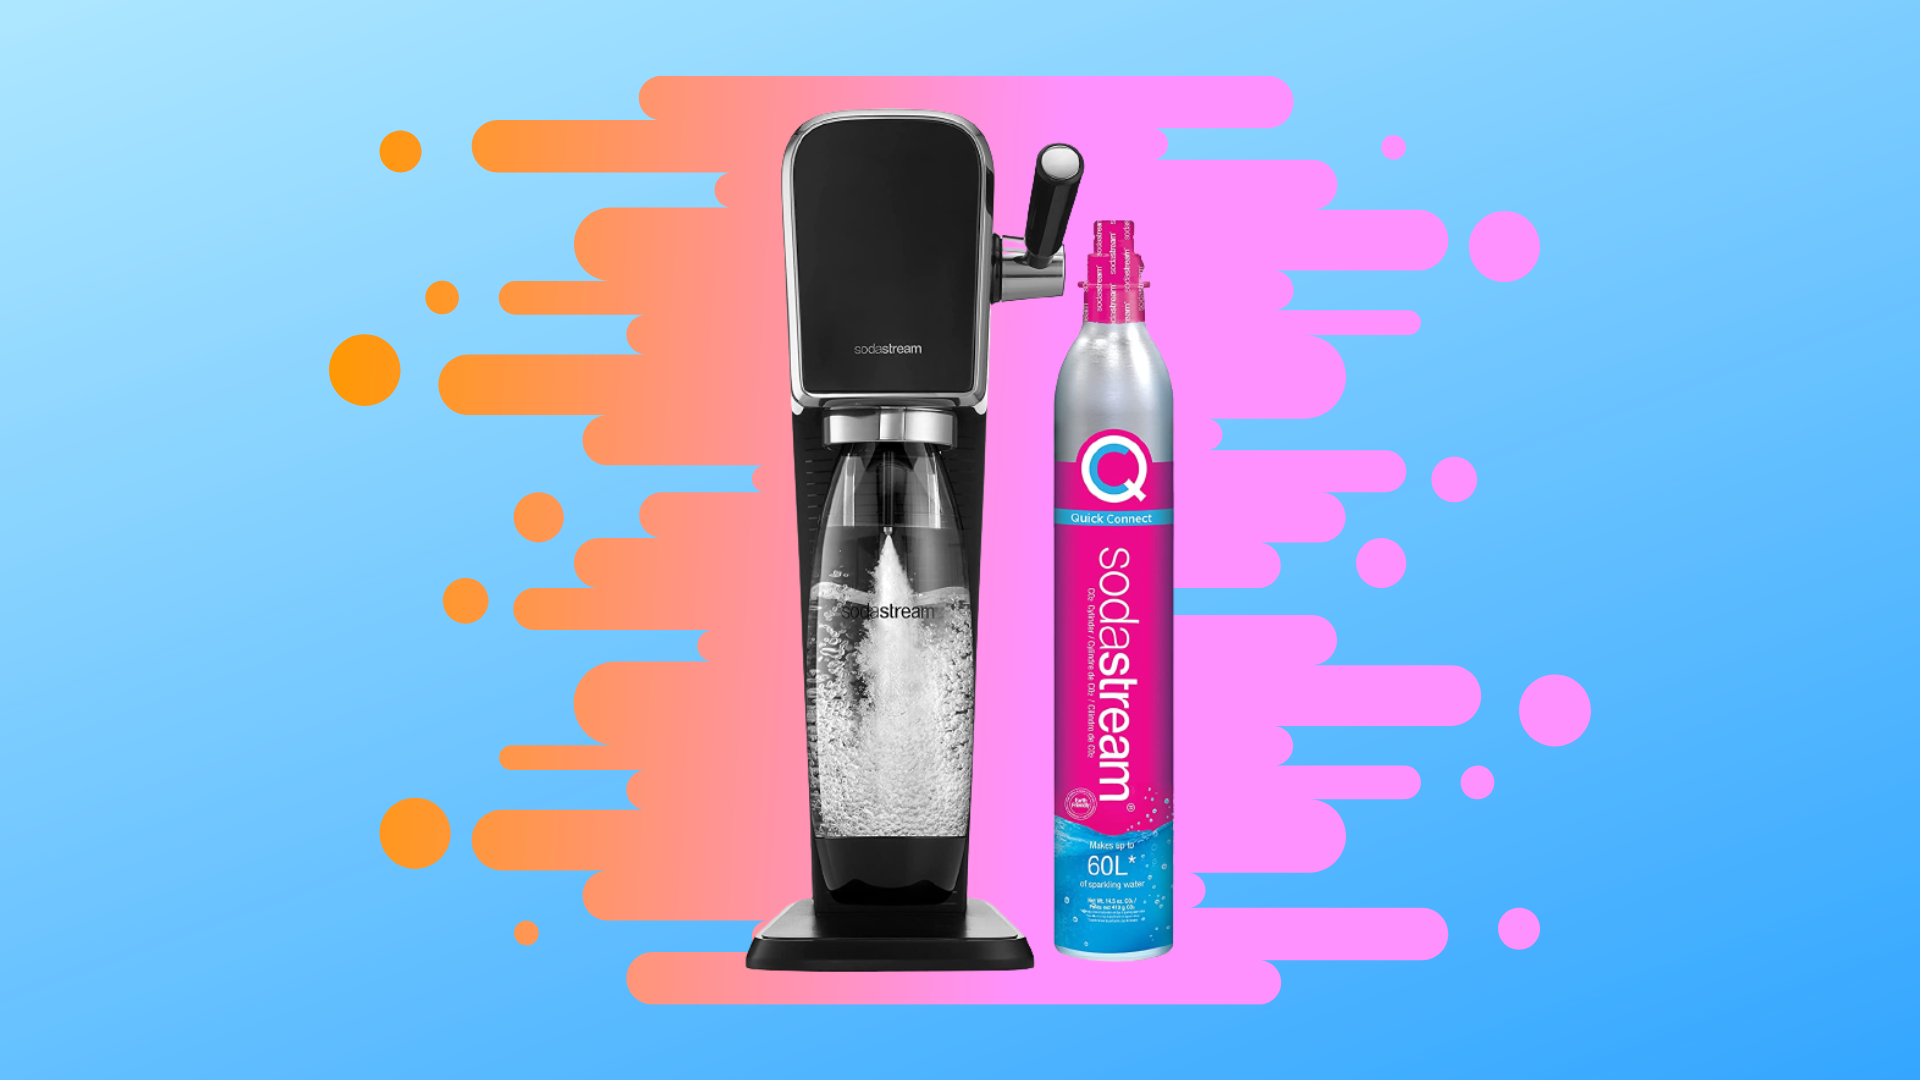 SodaStream Art sparkling water maker with CO2 bottle against blue and pink background. 